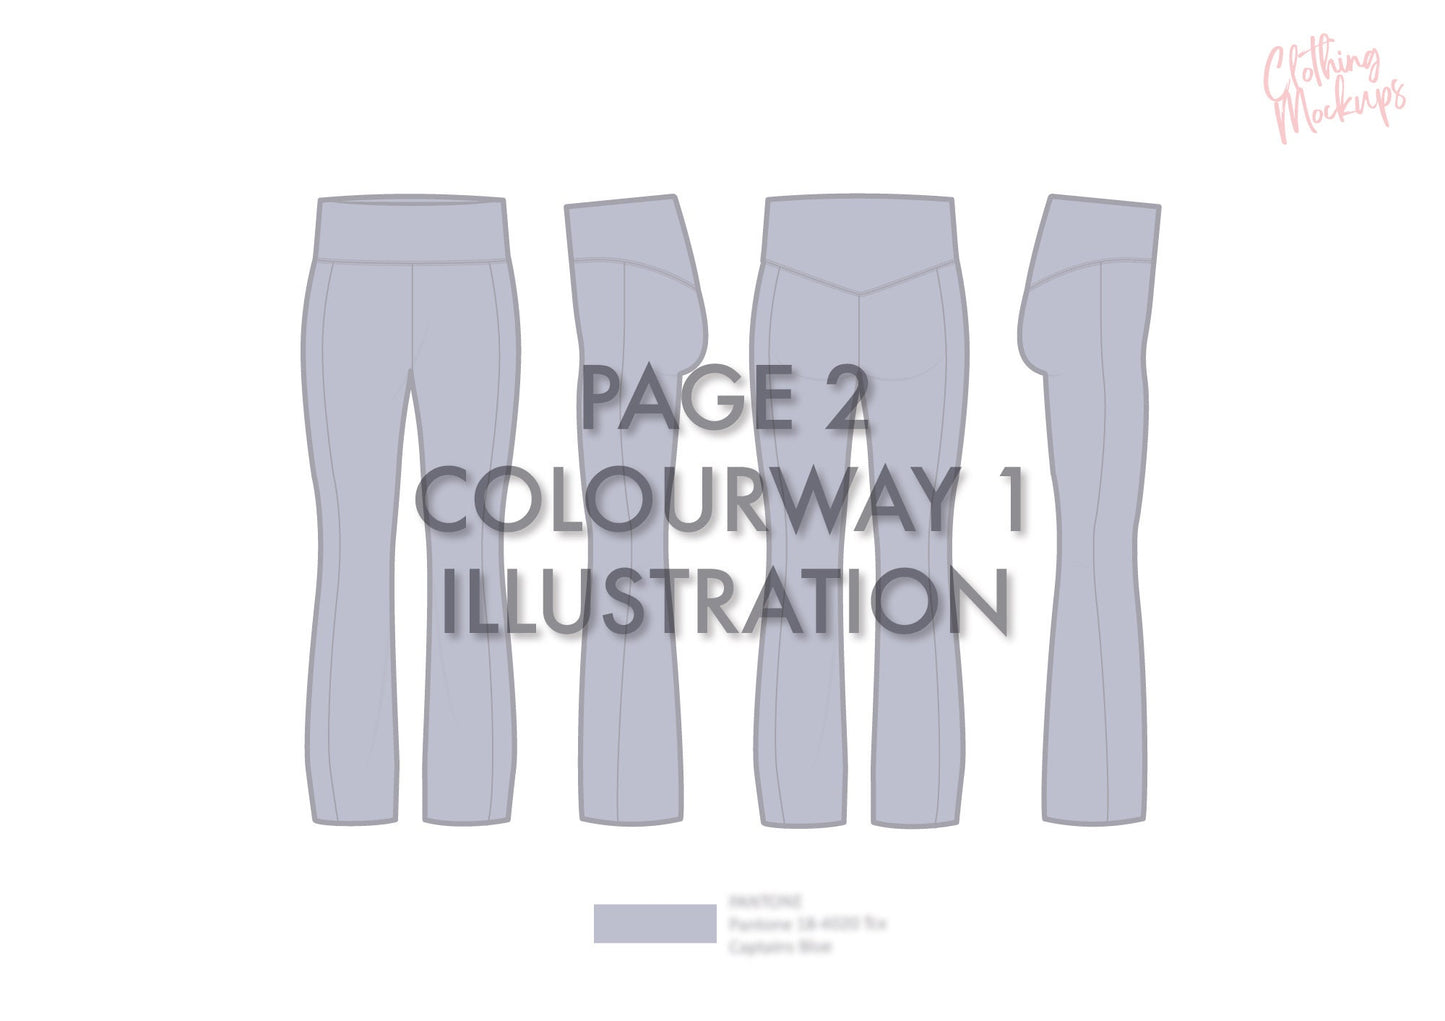 Flat Technical Drawing - Flared legging template - Vector & Pixel